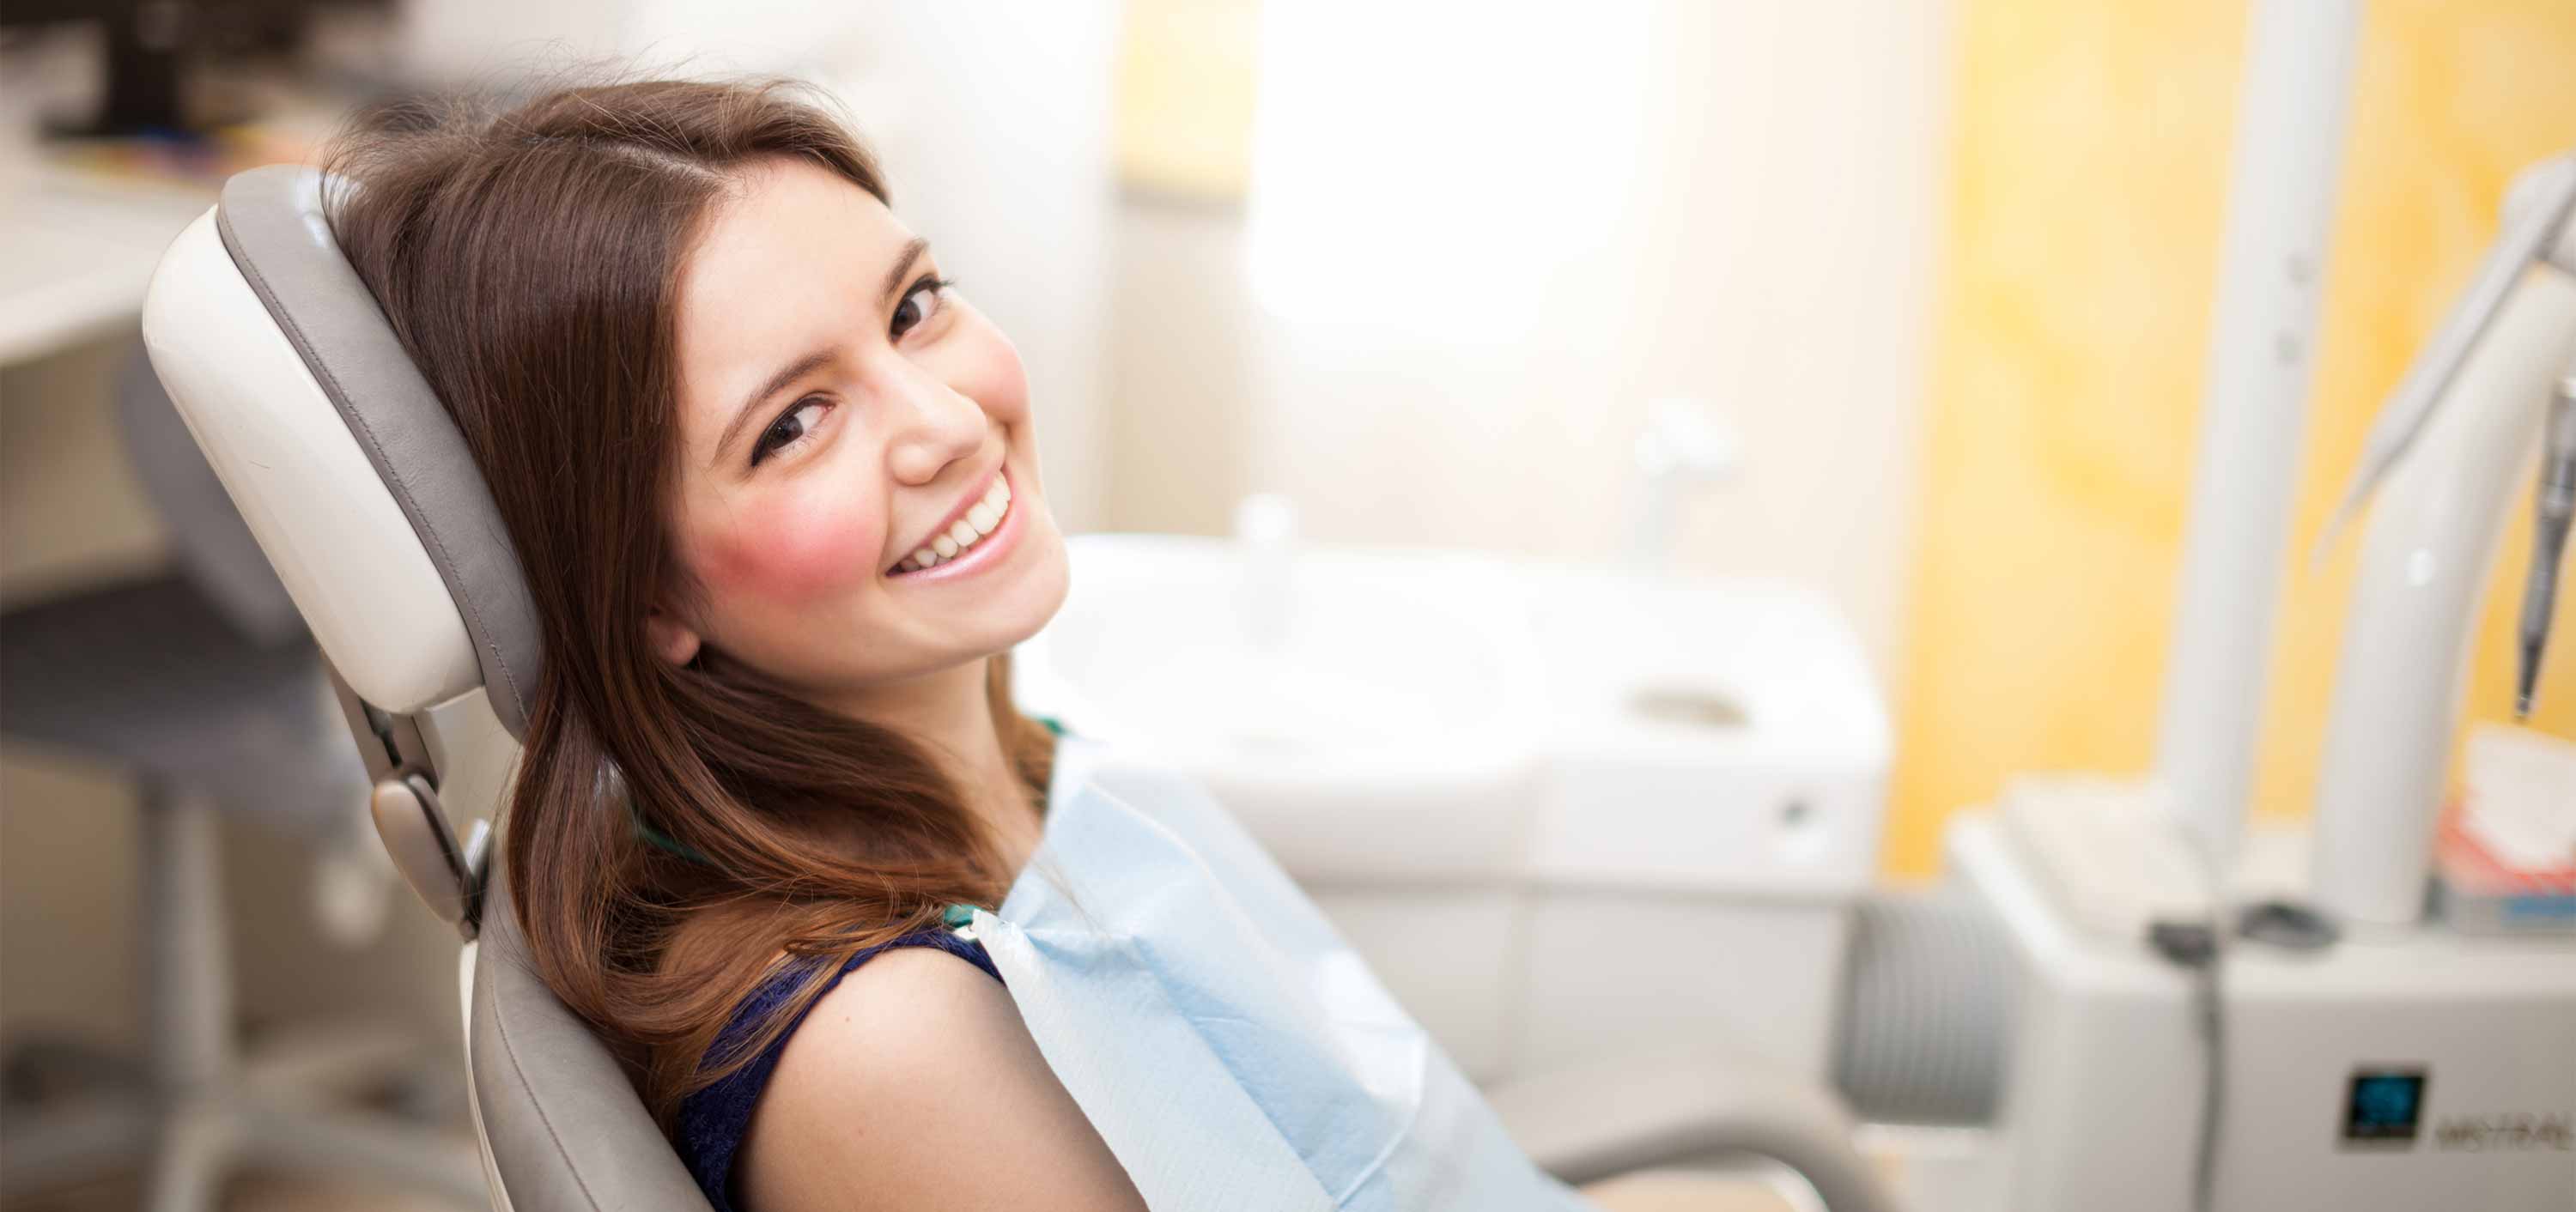 Young woman smiling at her dental cleaning